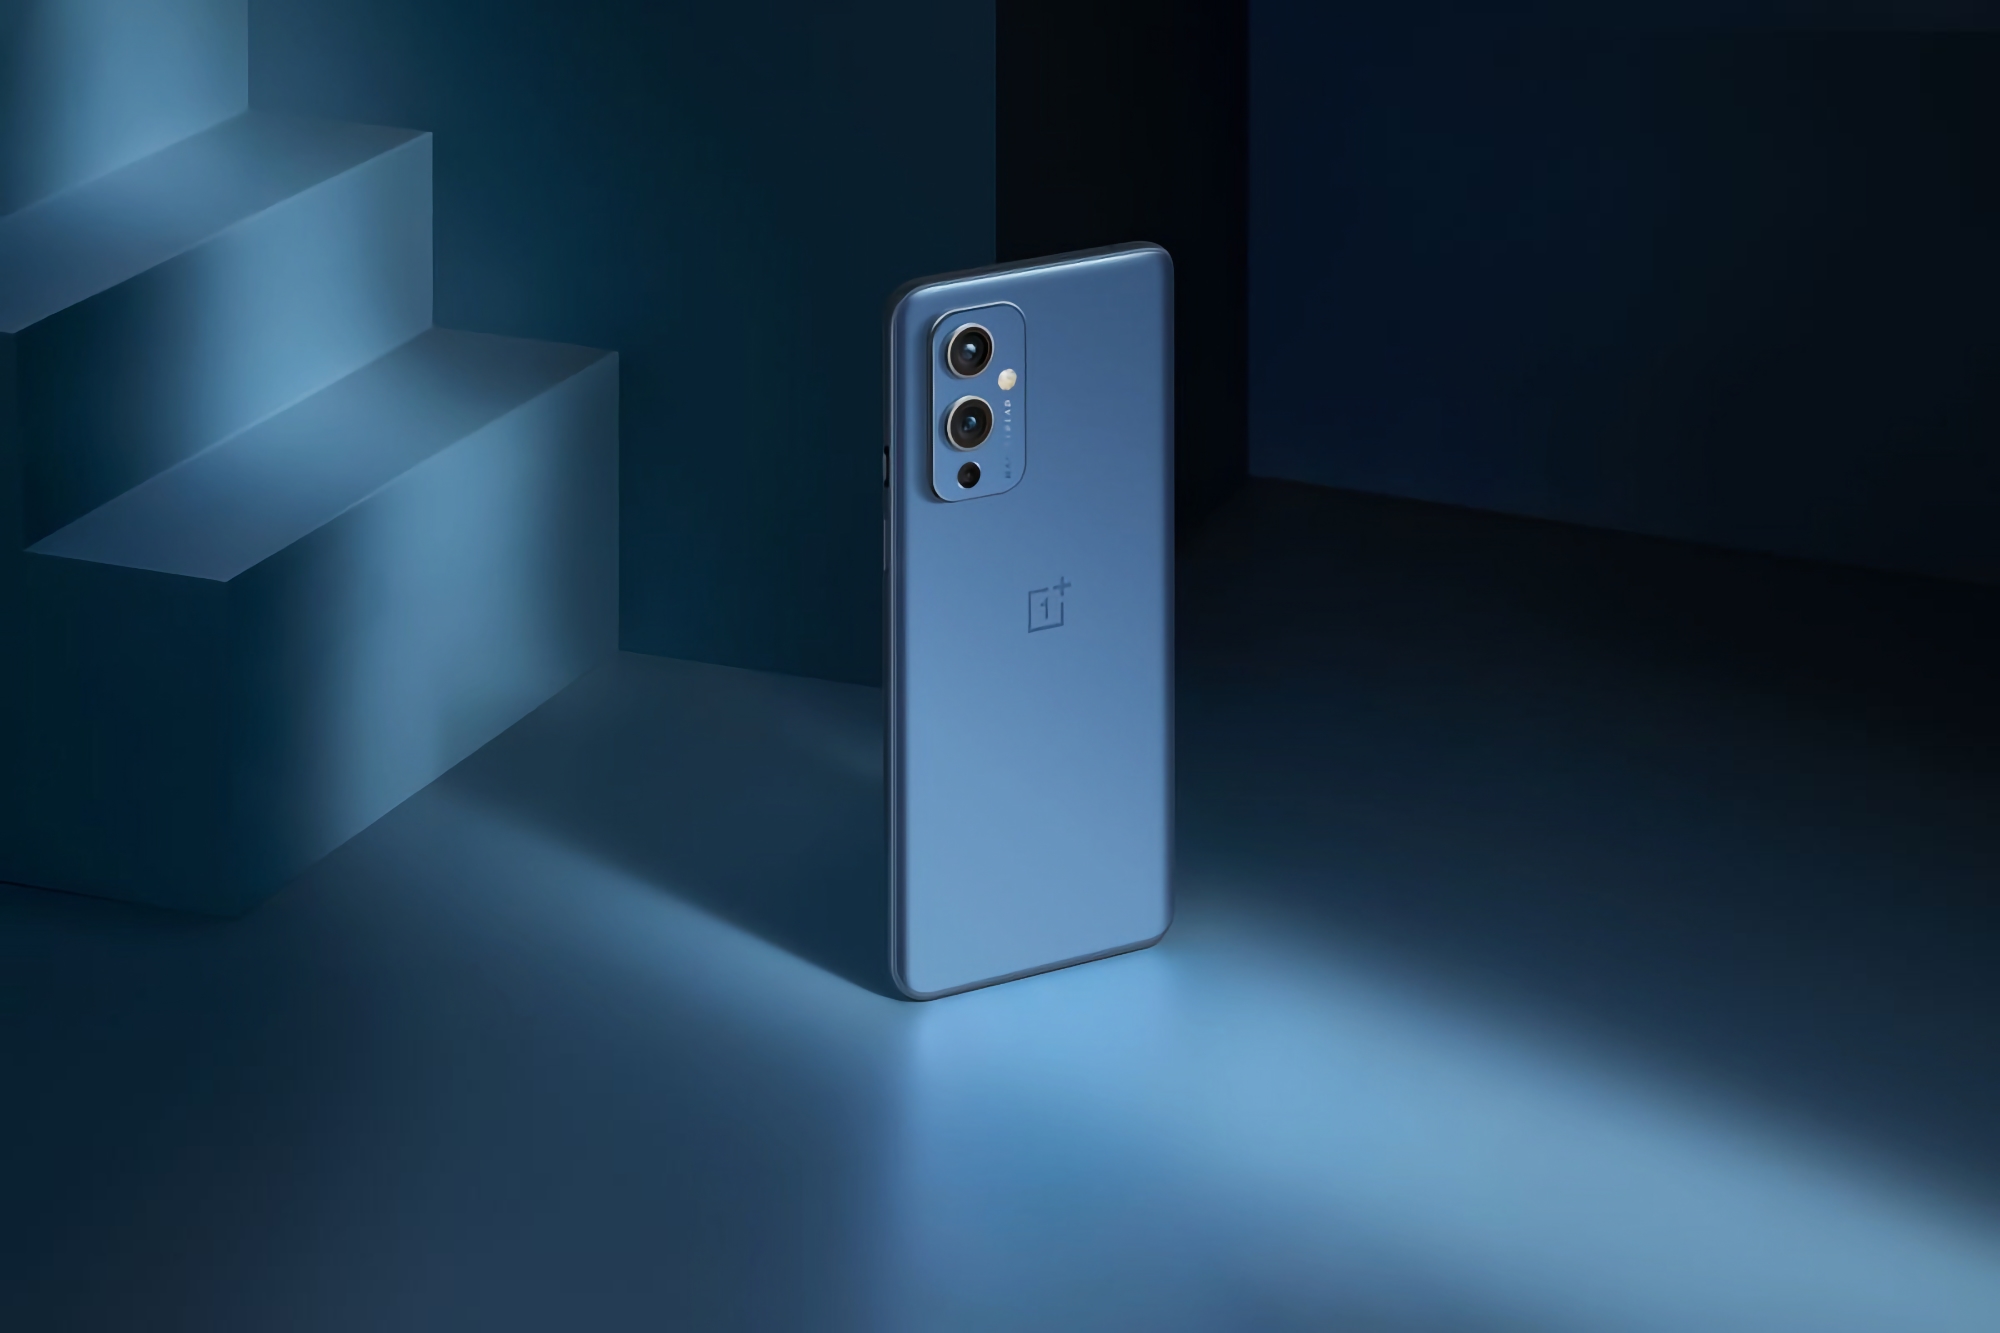 OnePlus 9RT, OnePlus 9 and OnePlus 9 Pro have received OxygenOS 14 Open Beta 2 with Android 14 on board